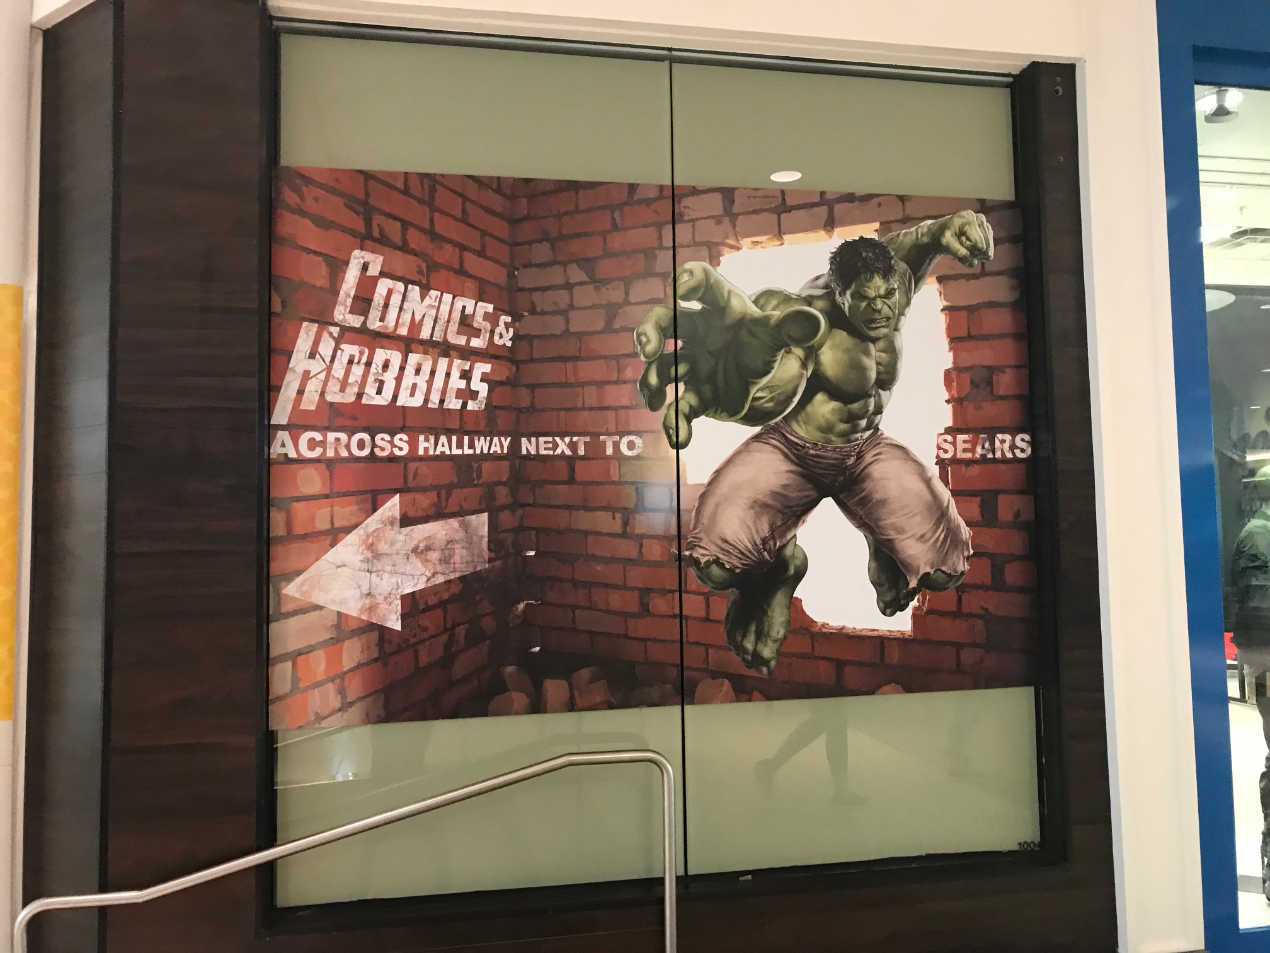 directional window mural for comics & hobbies with image of the Hulk